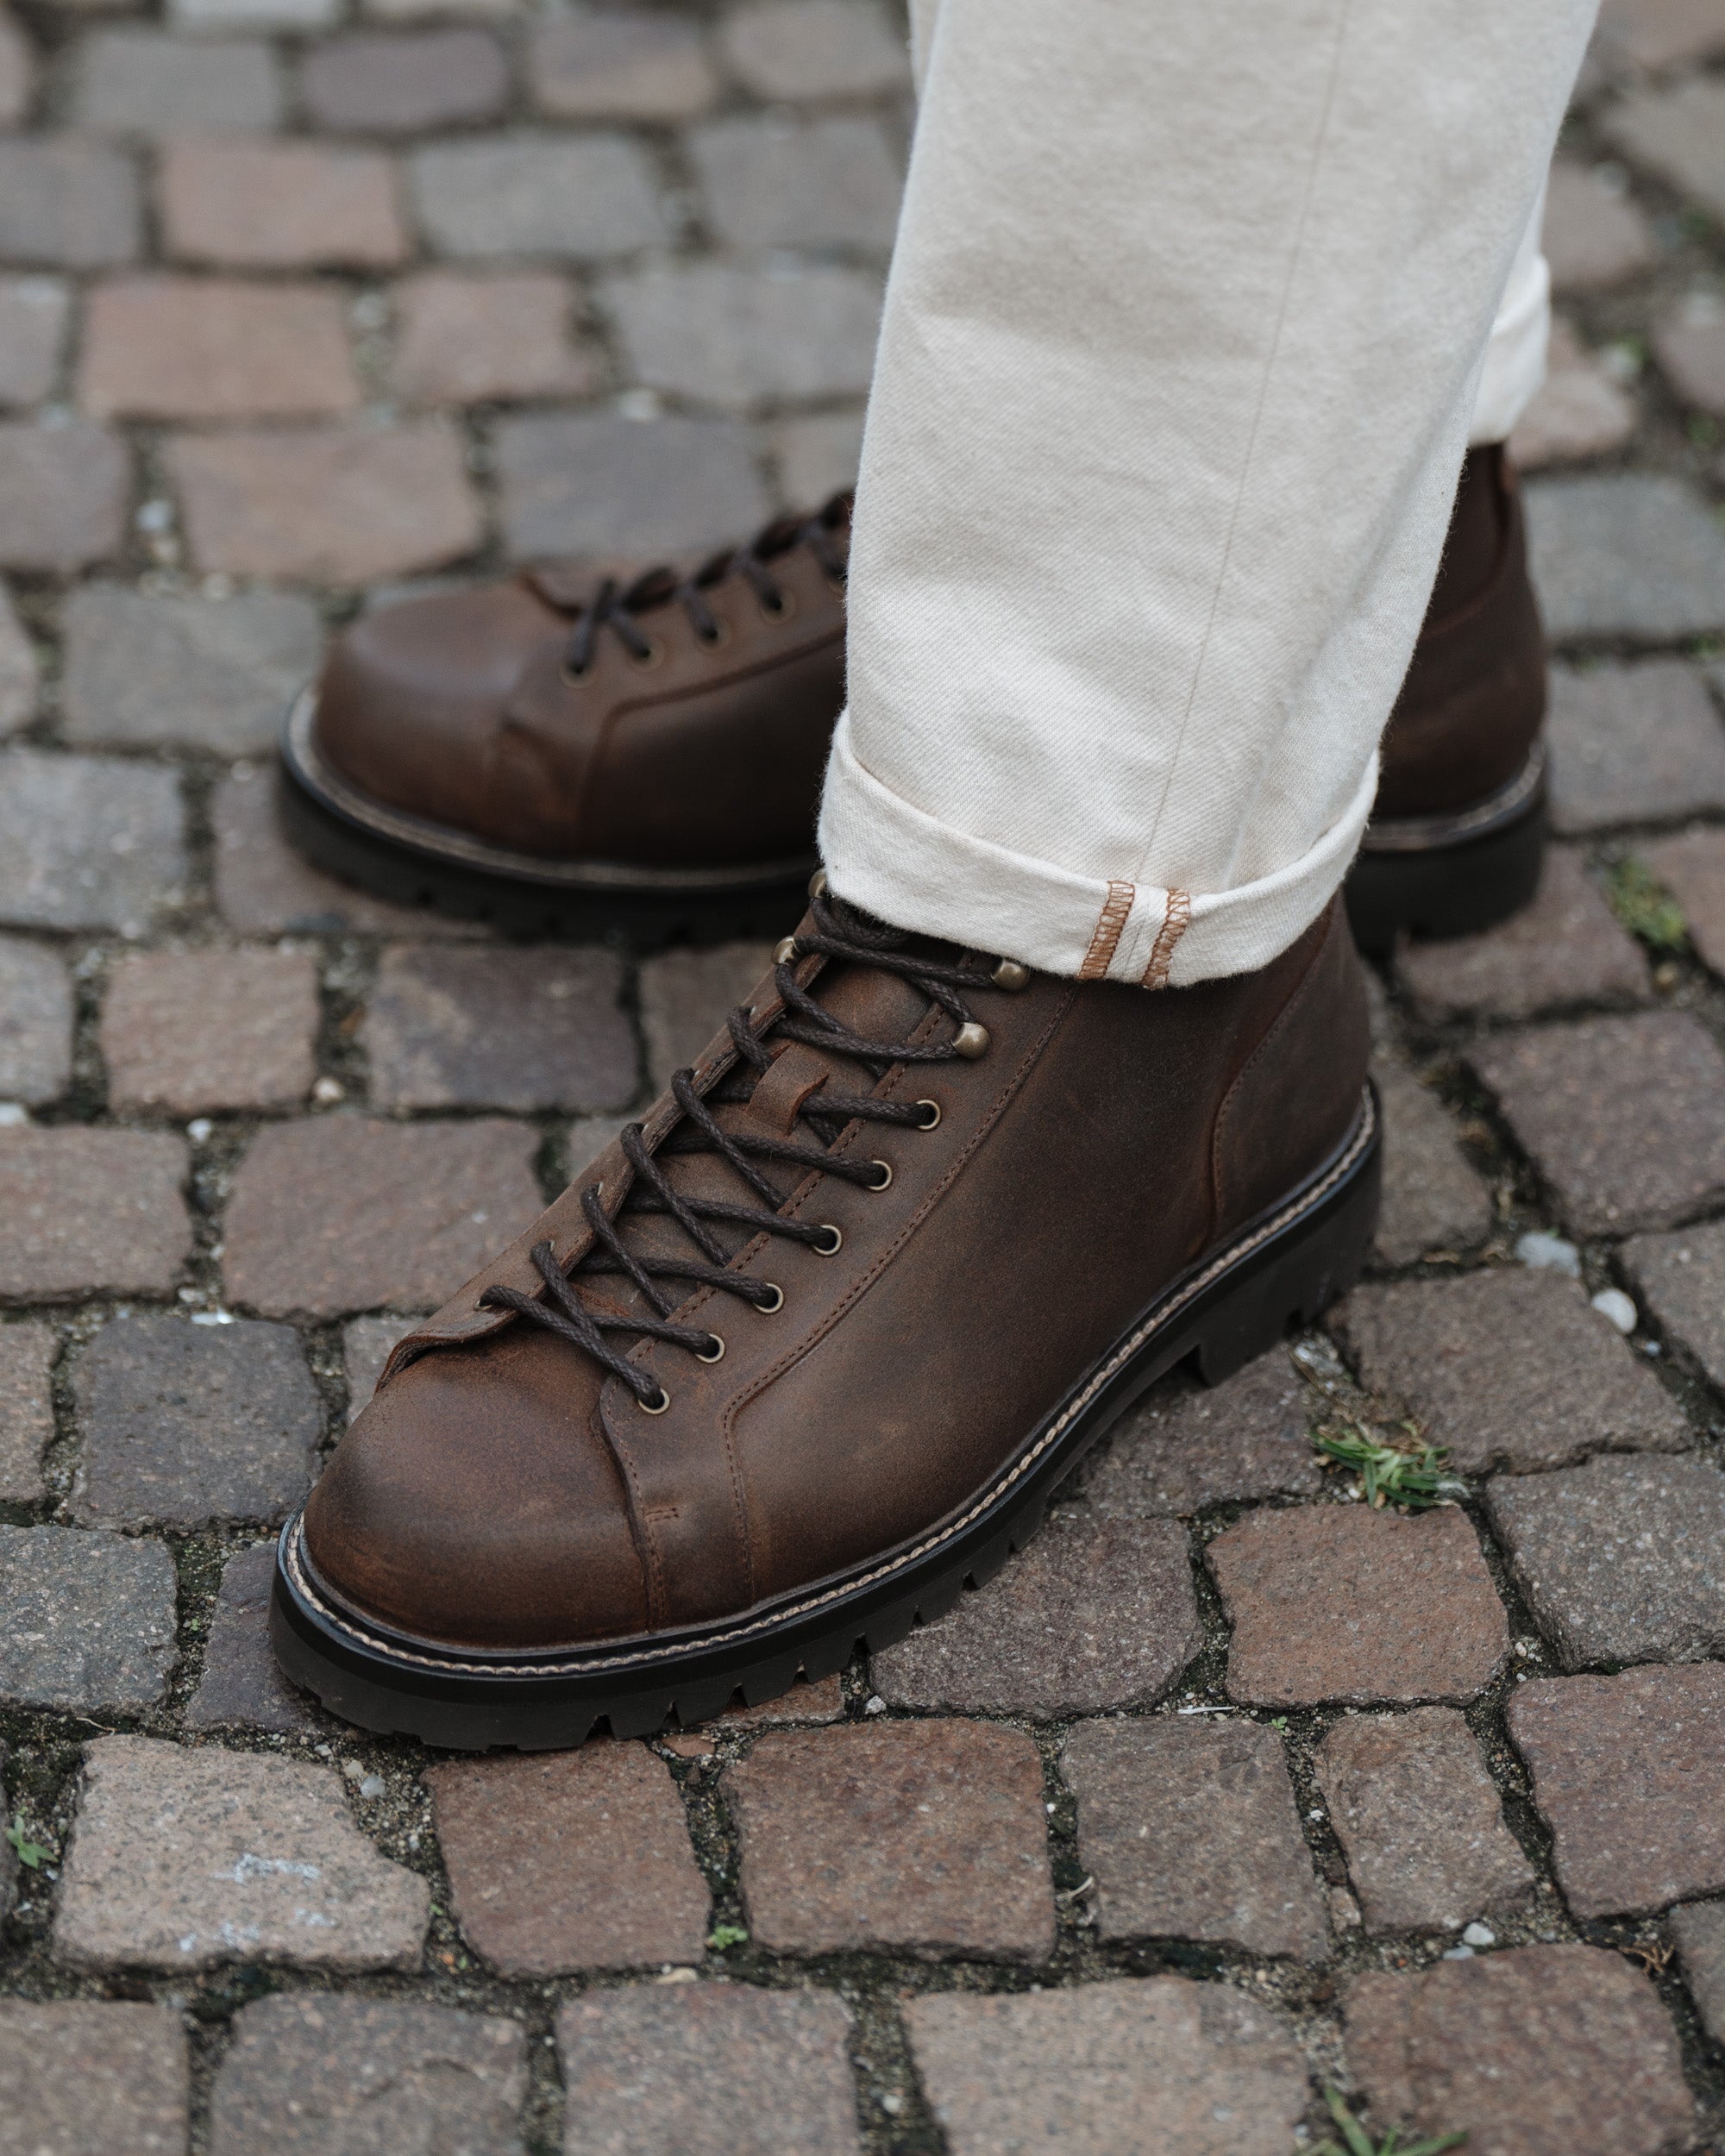 Velasca | Men's brown leather combat boots, Made in Italy